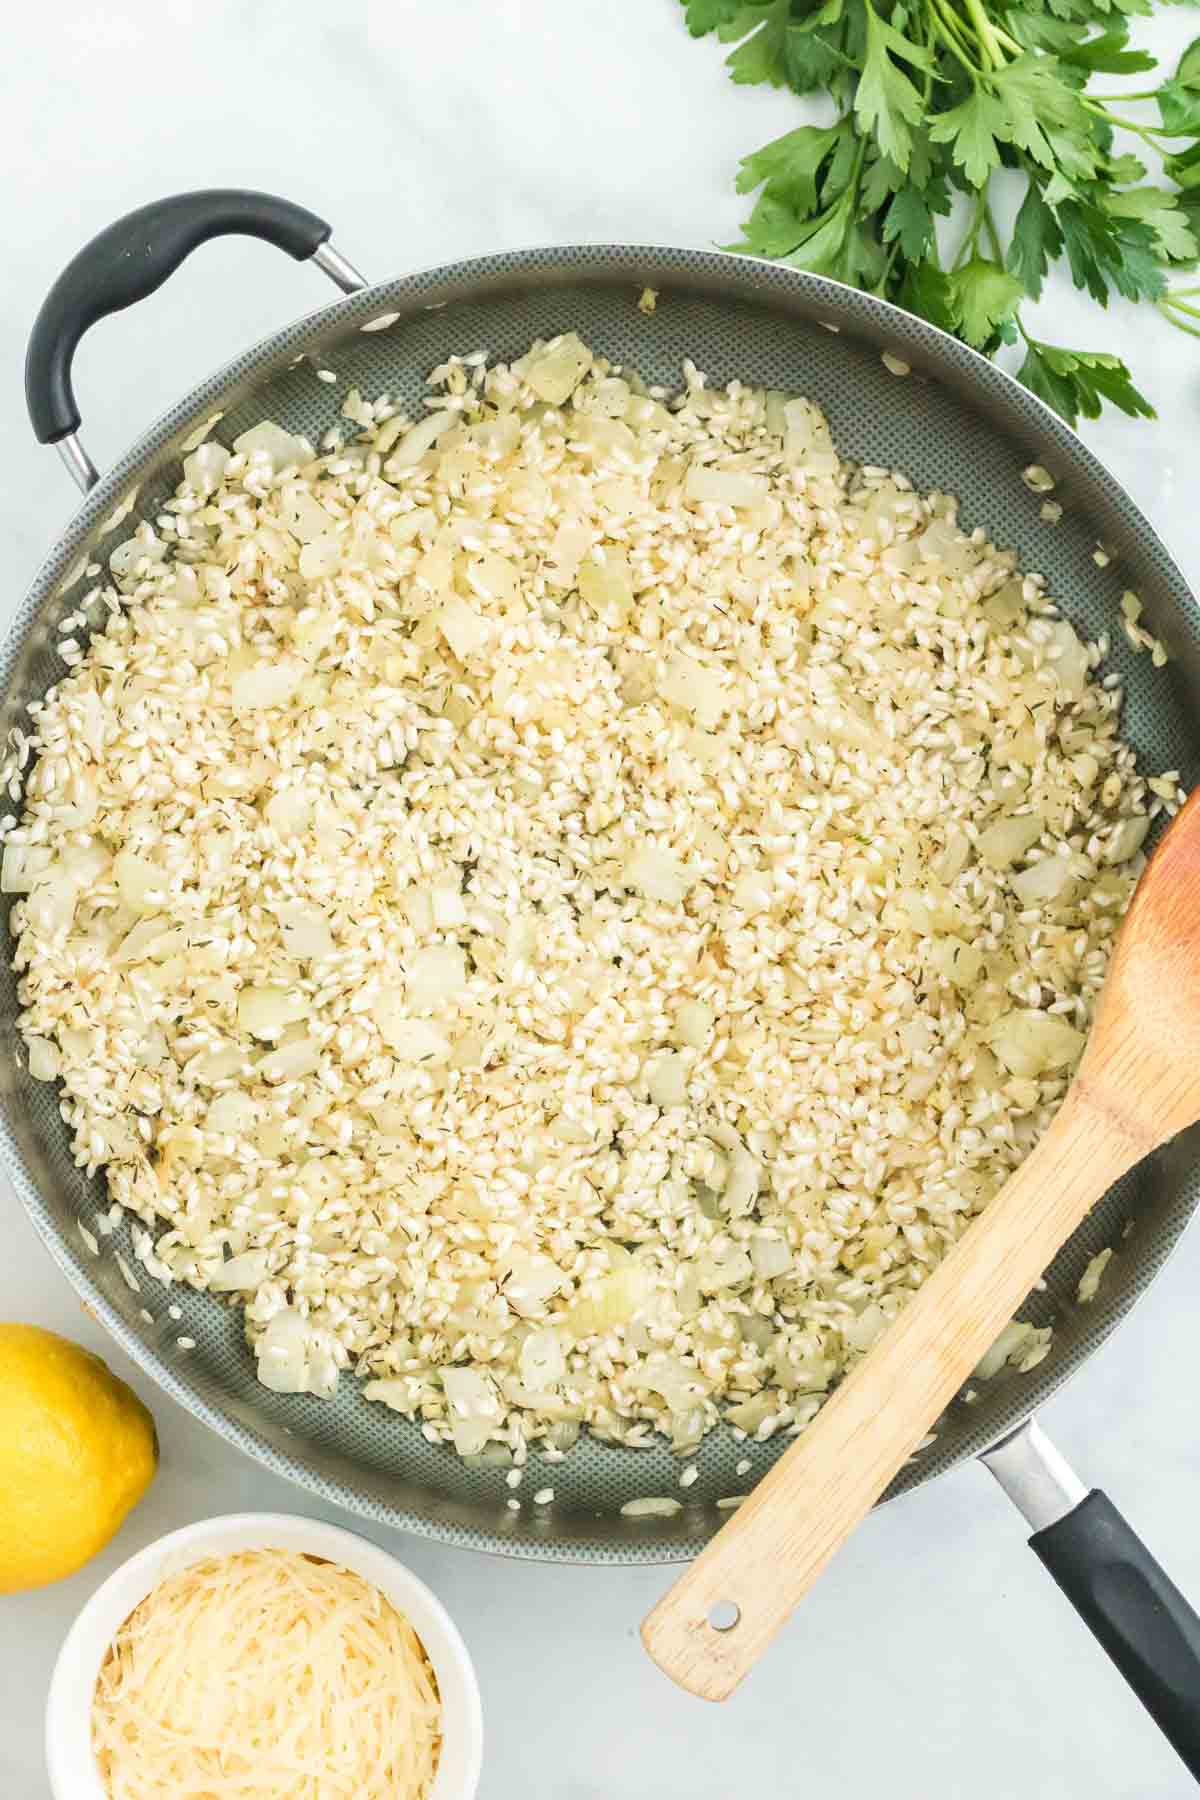 Arborio rice added to a skillet with sauteed onions.